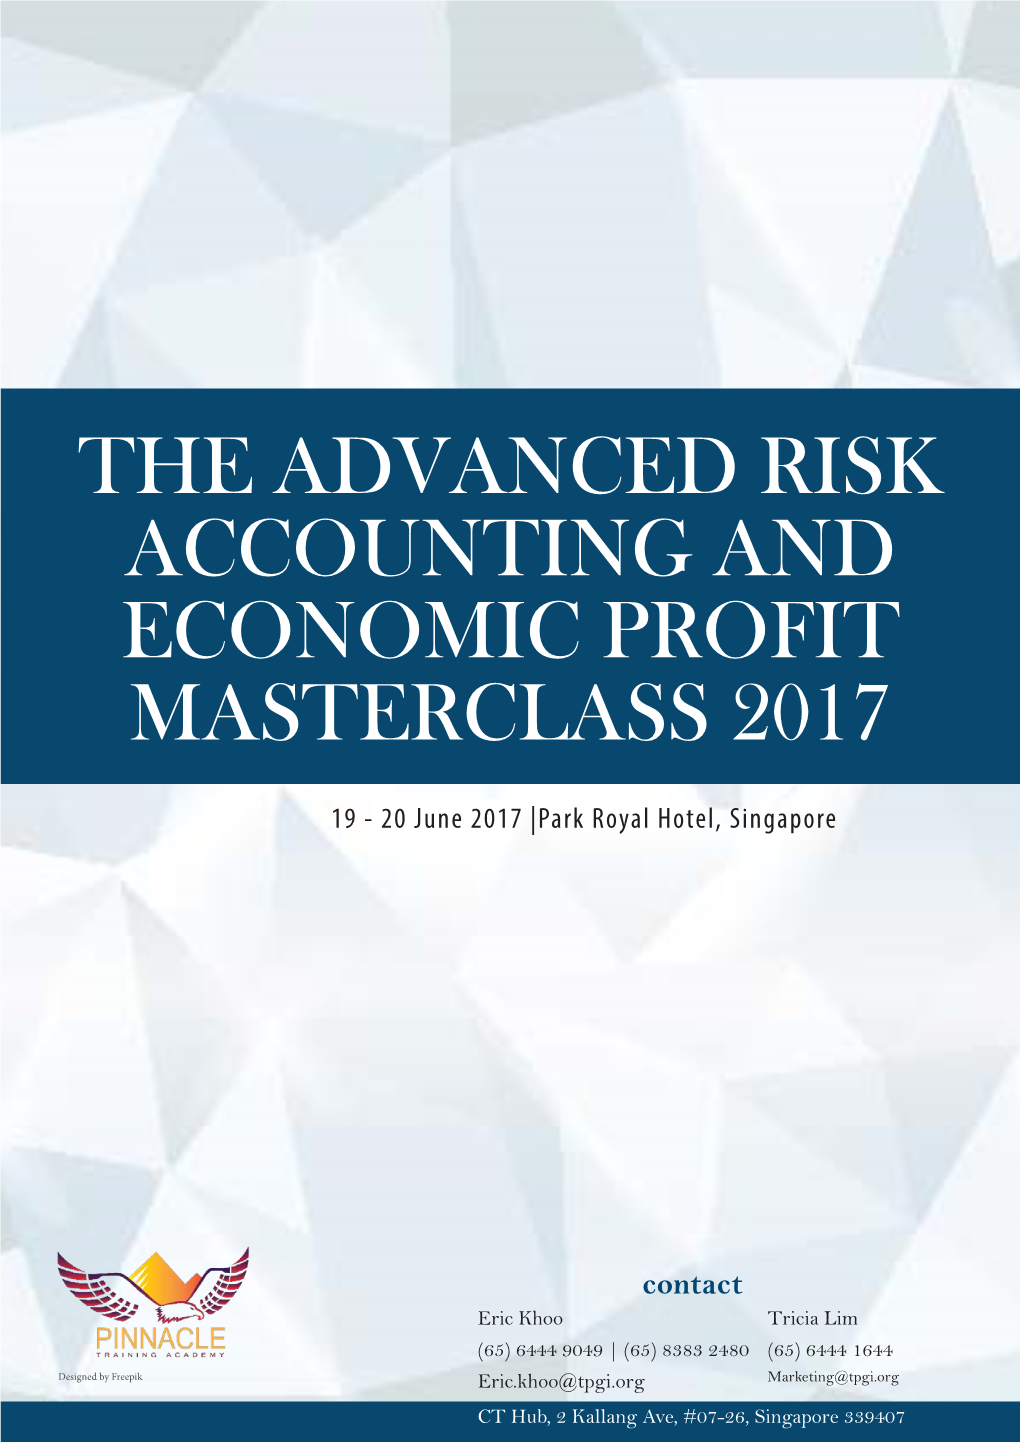 The Advanced Risk Accounting and Economic Profit Masterclass 2017